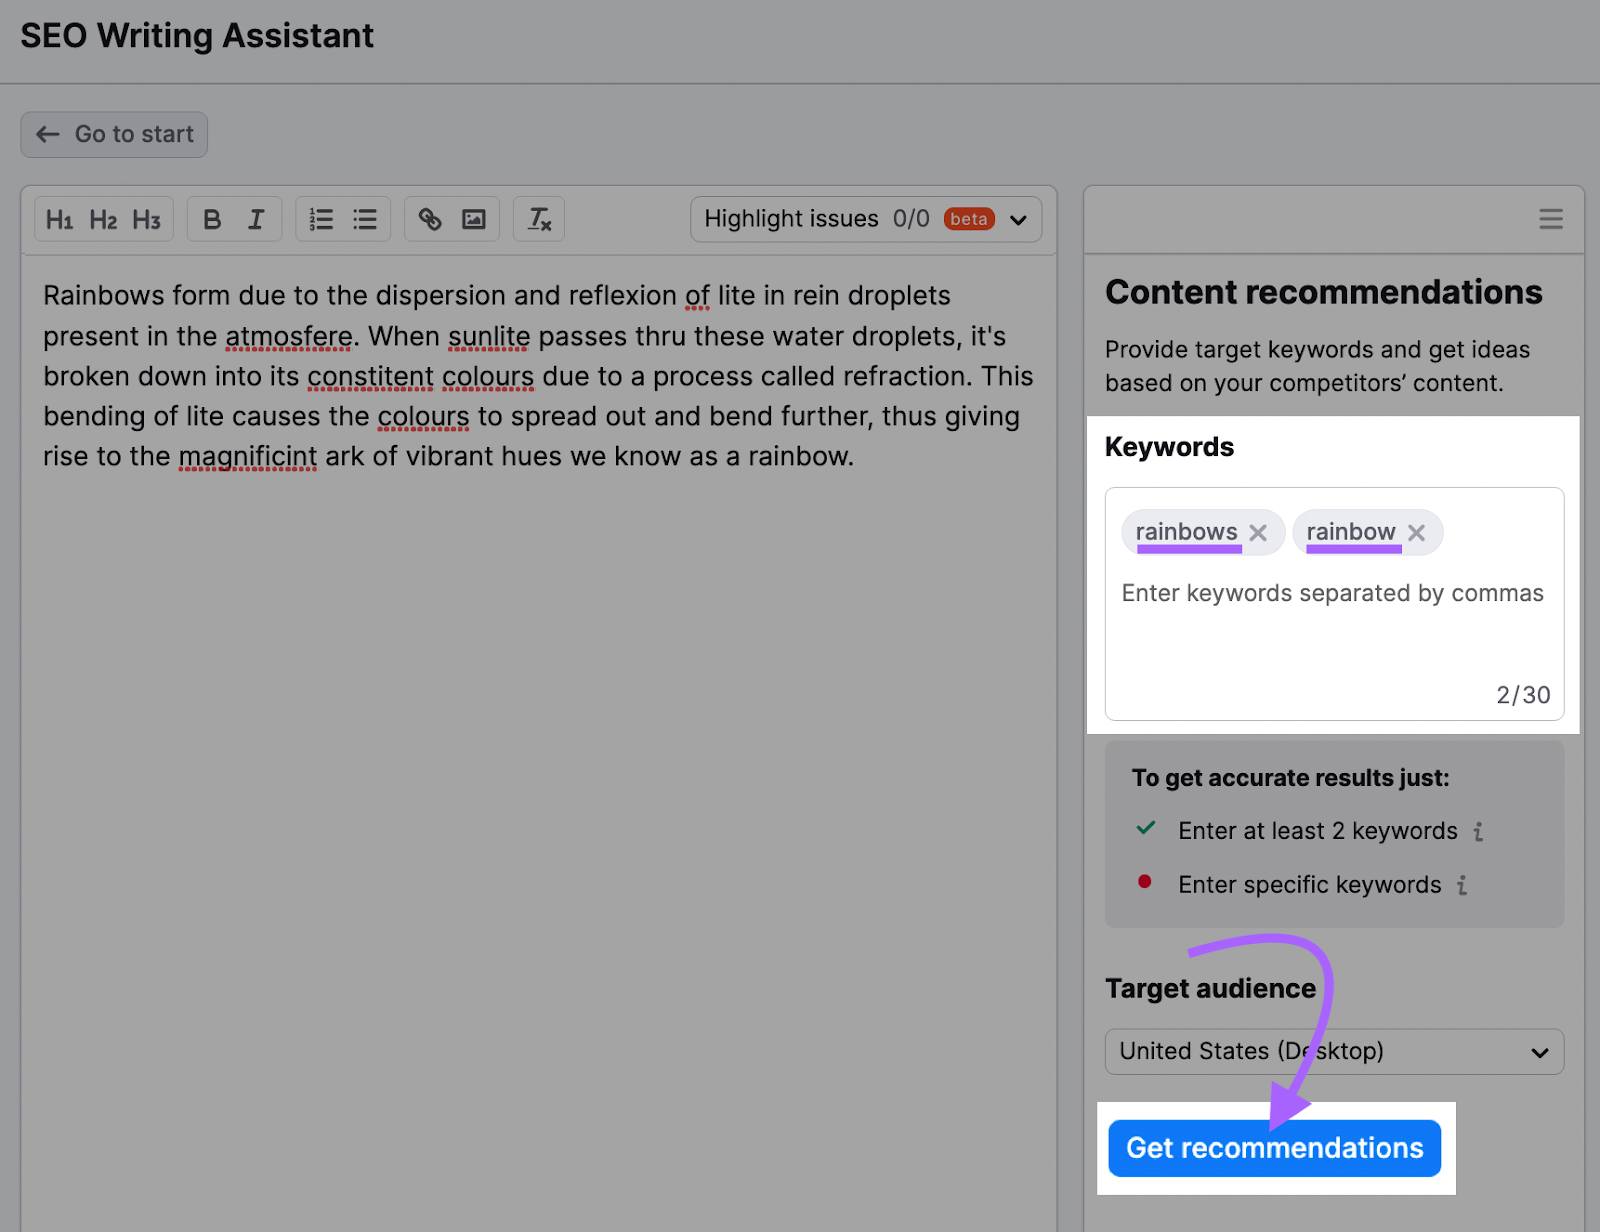 SEO Writing Assistant editor page with "Get recommendations" button highlighted